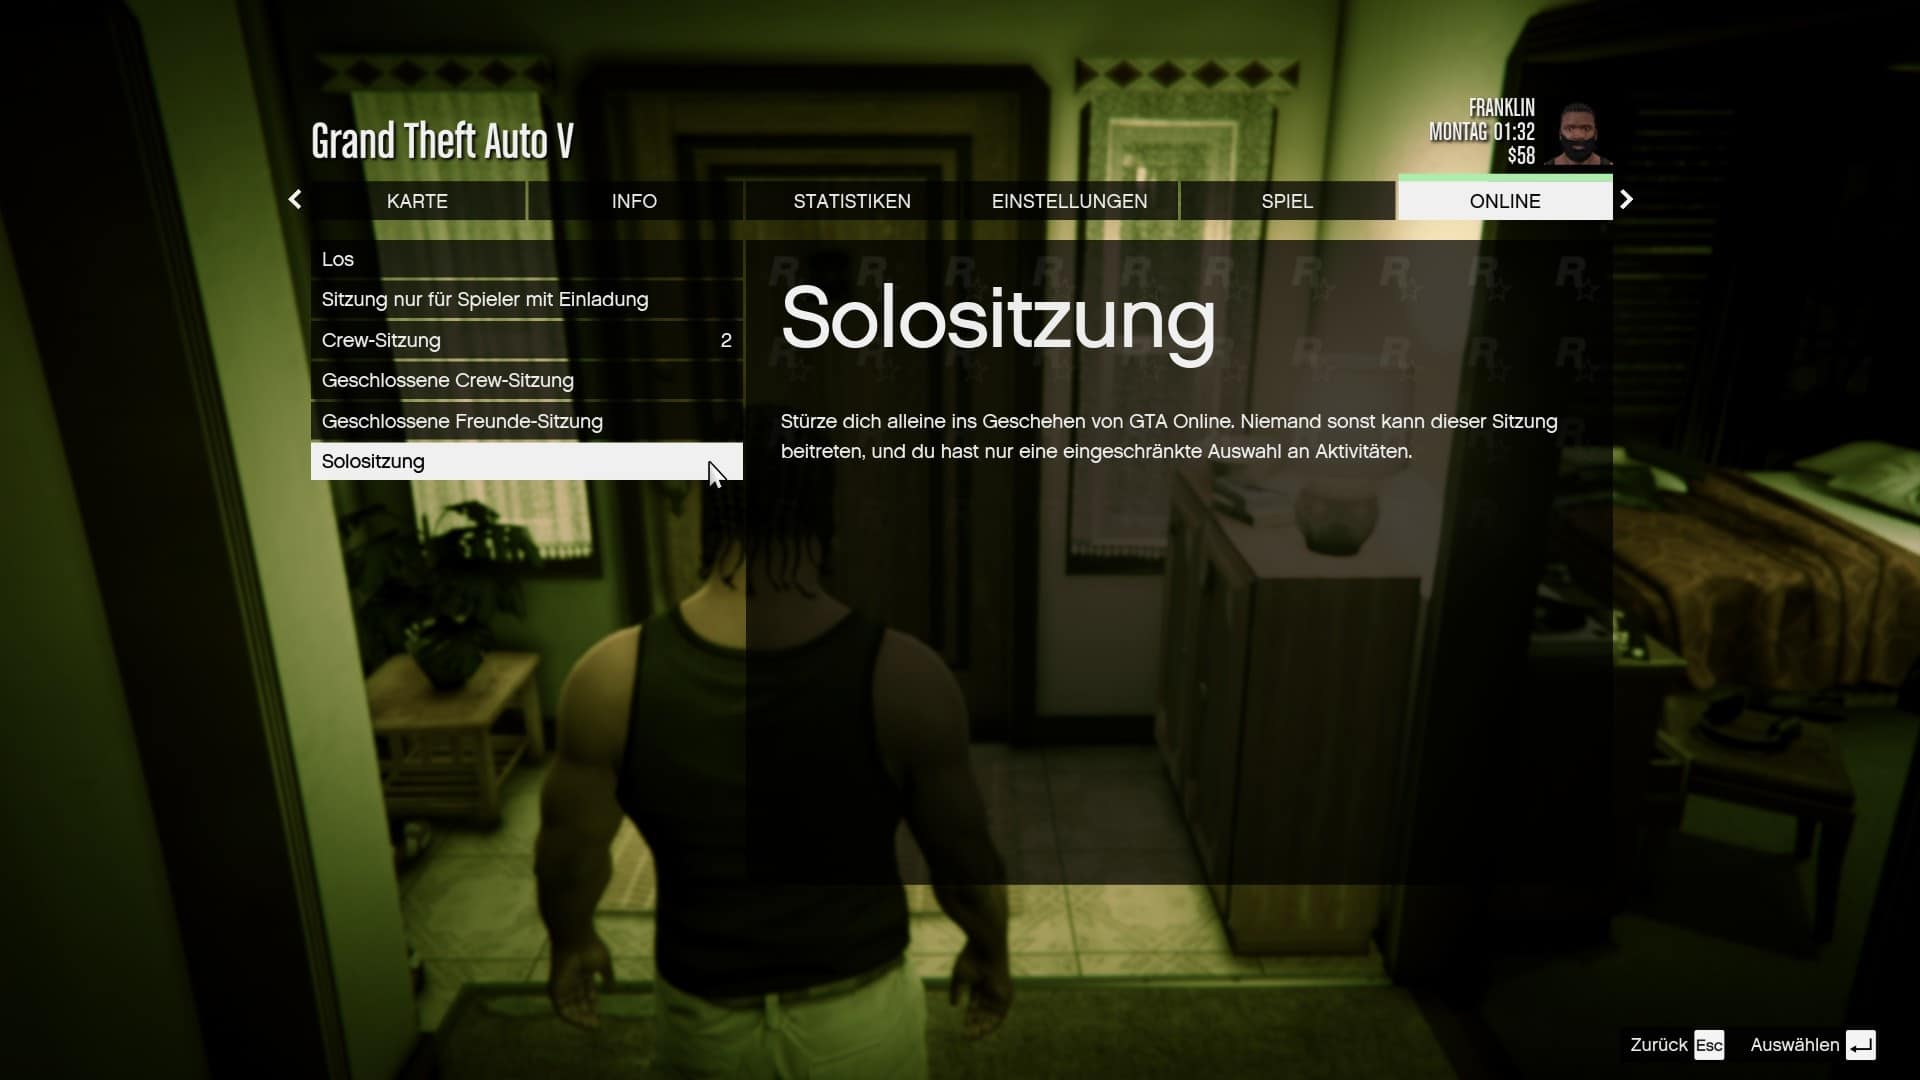 Solo or friends sessions can only be started in GTA Online via GTA 5's Story Mode.